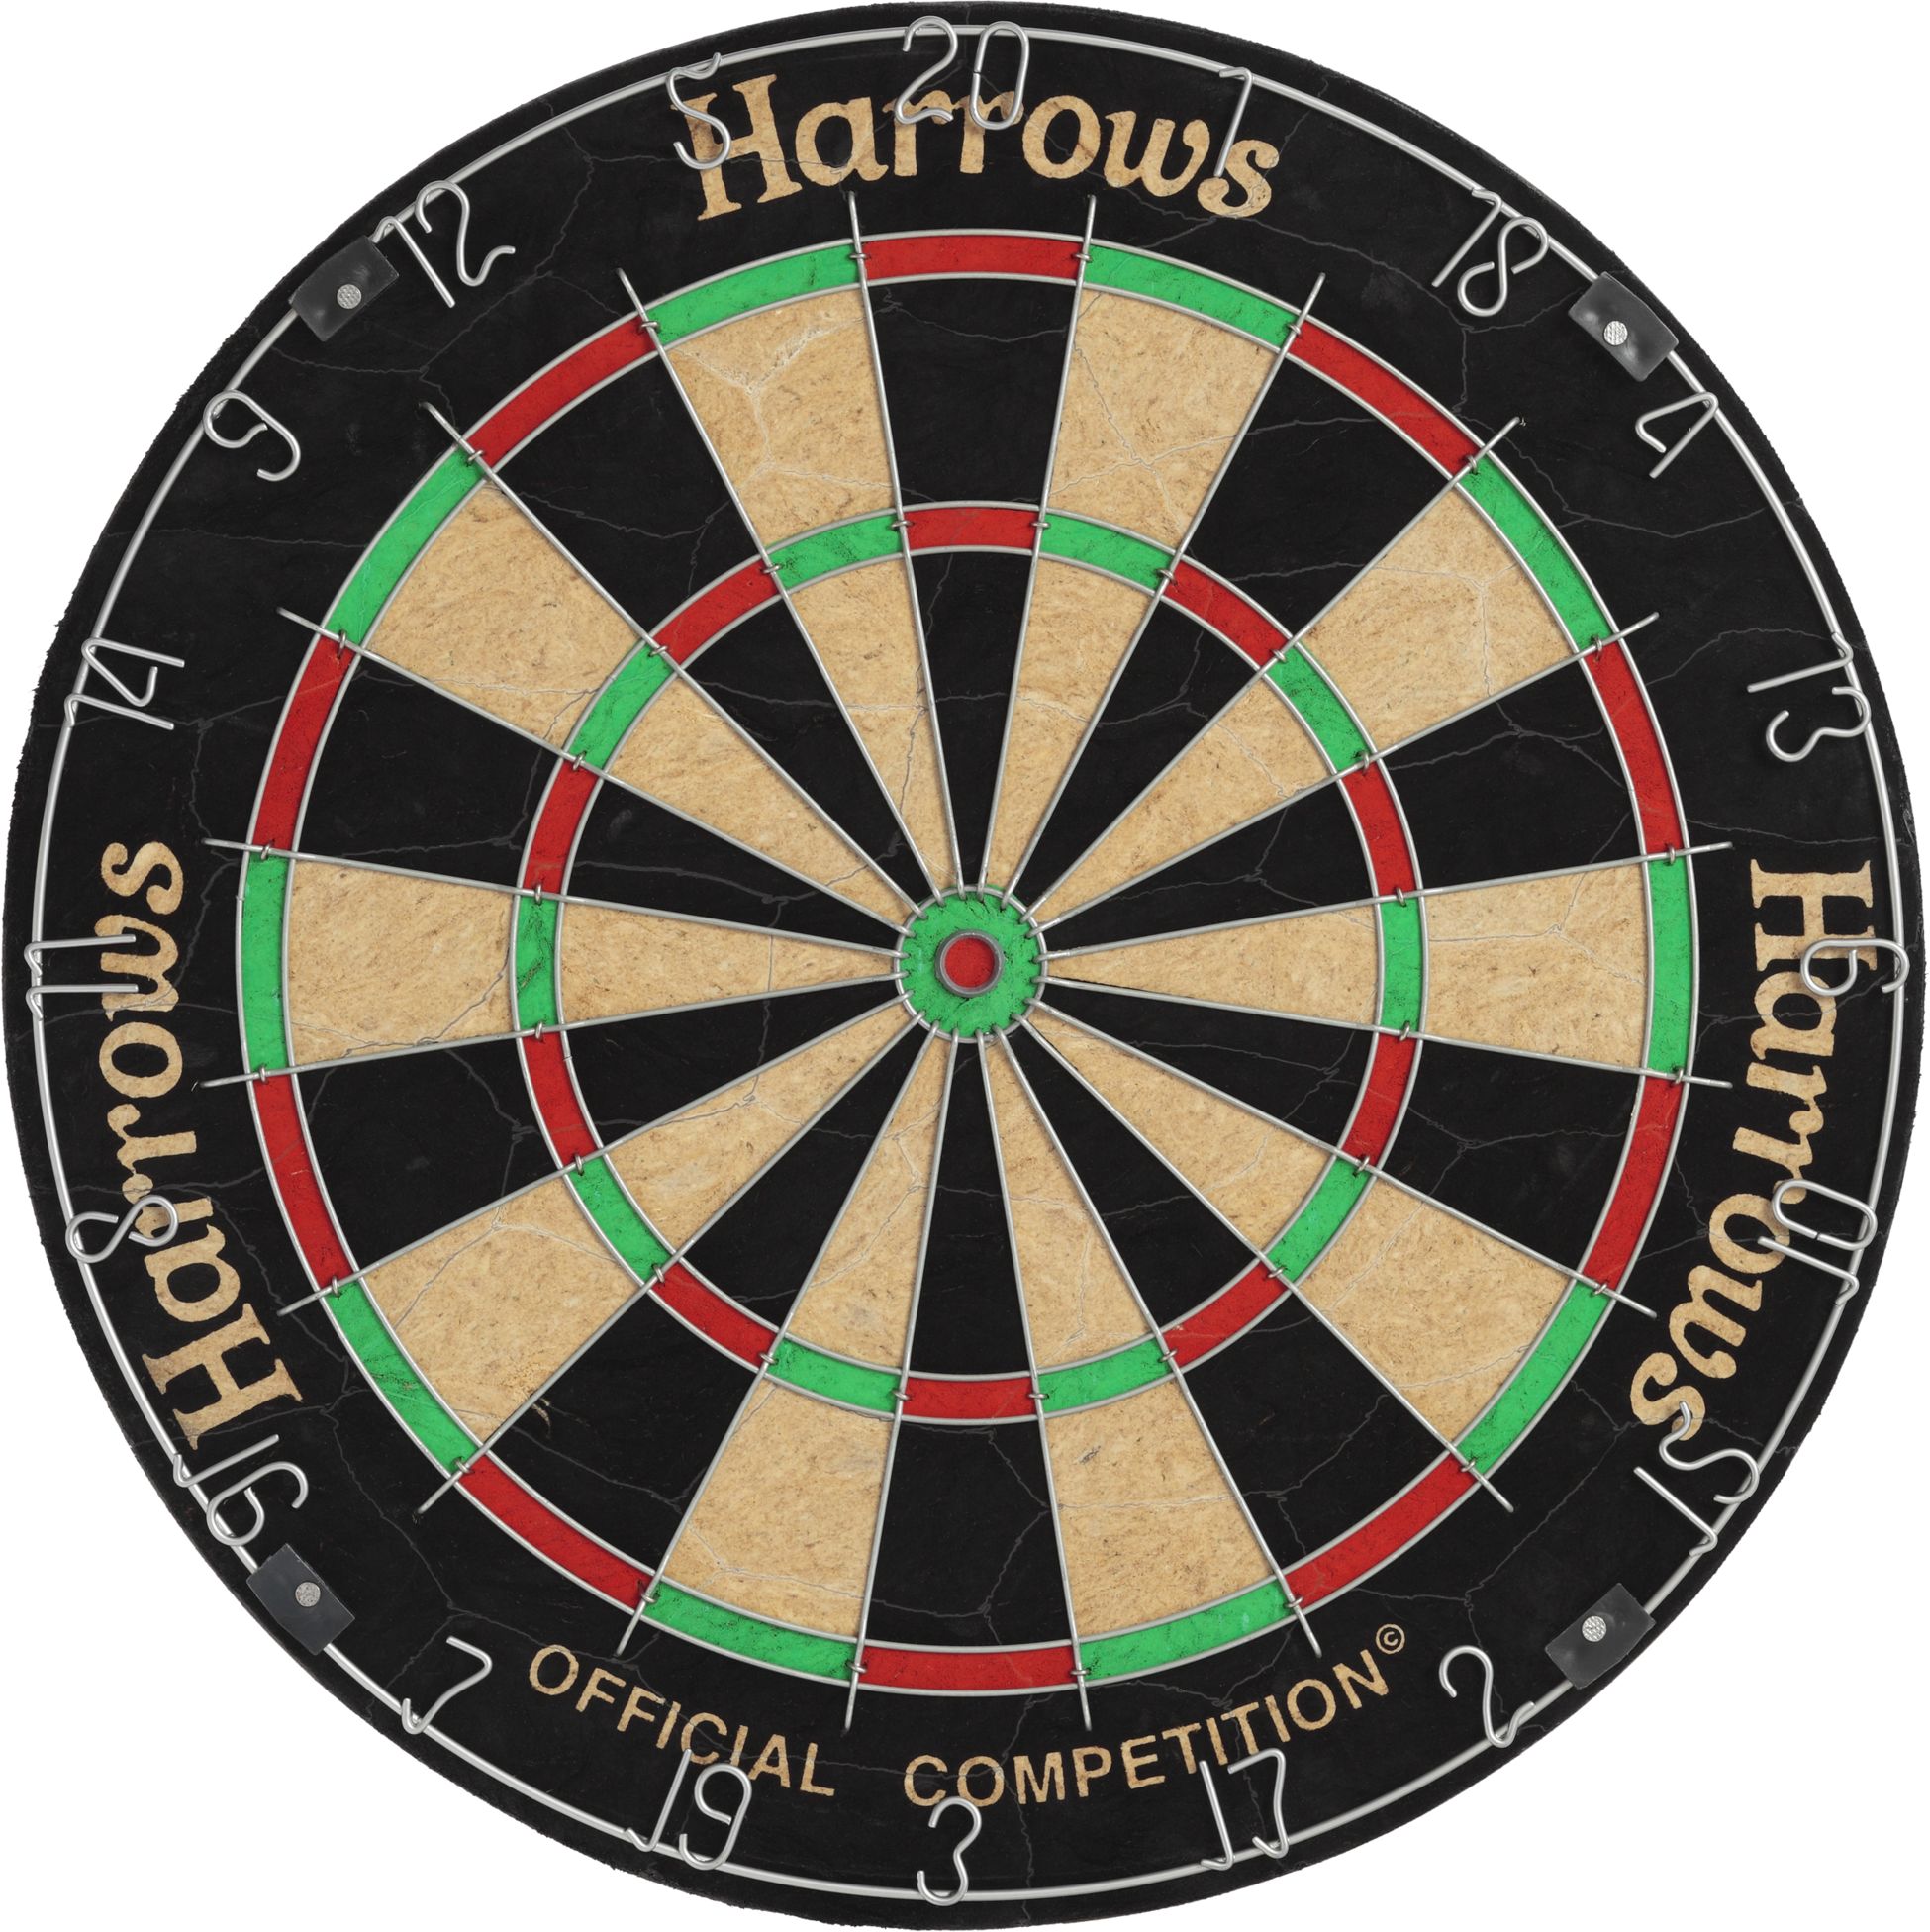 HARROWS, DARTBOARD OFFICIAL COMPETITION